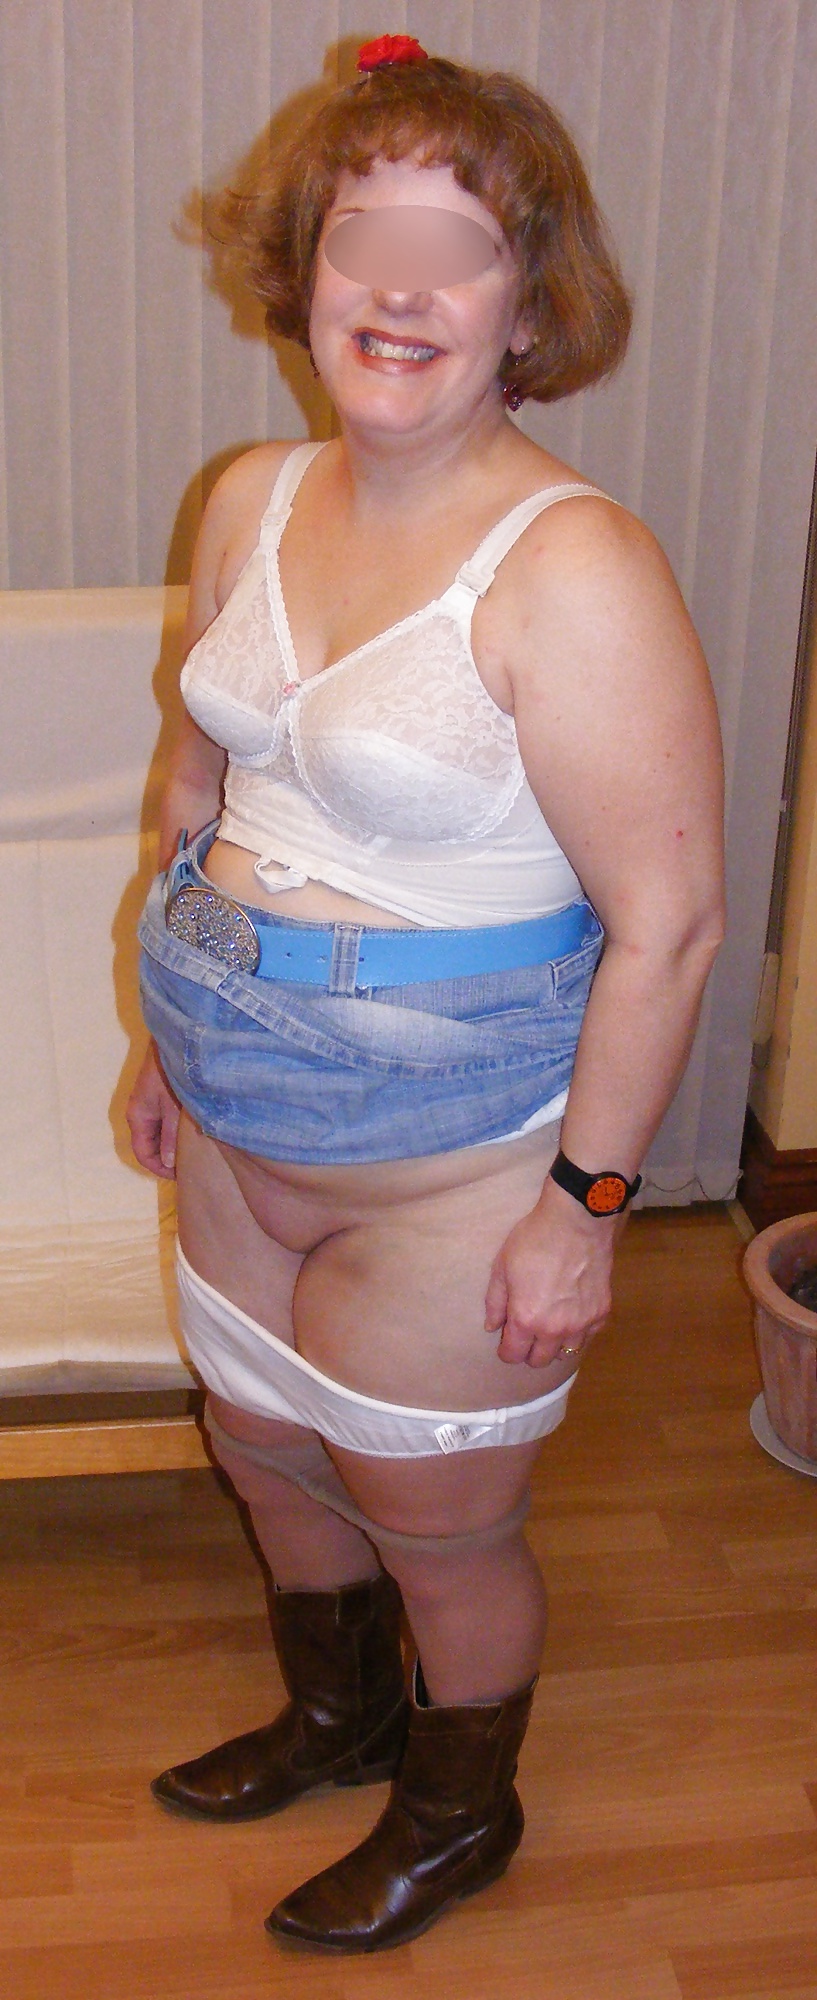 Tights, denim skirt, and big white knickers adult photos